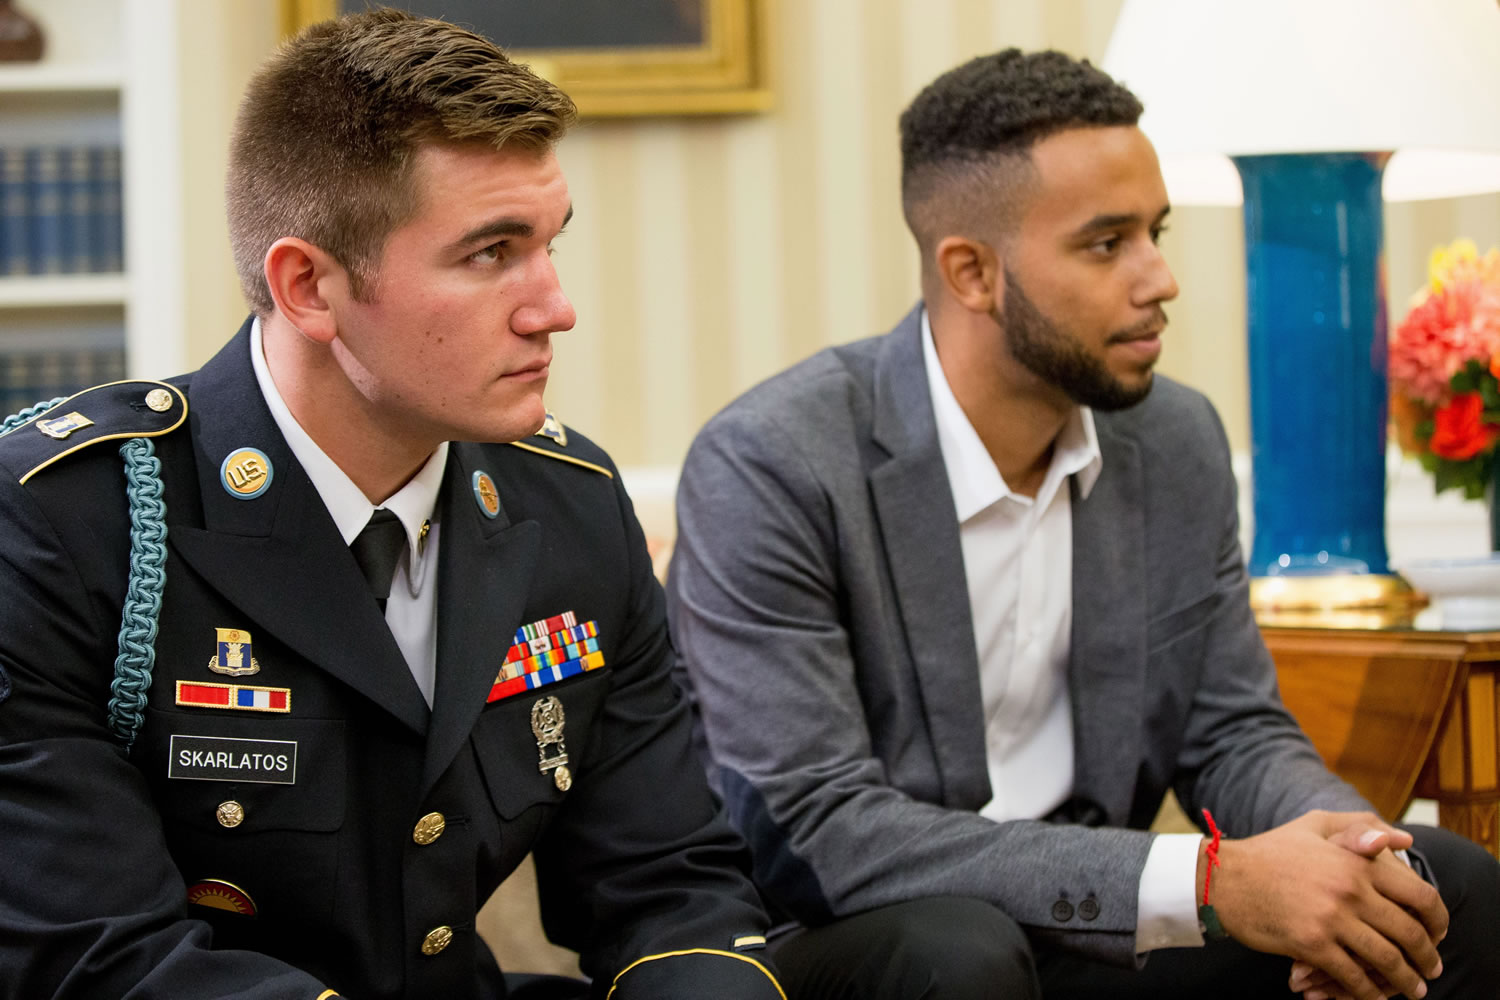 President Barack Obama meets with Oregon National Guardsman Alek Skarlatos, left,  Anthony Sadler, right, and Air Force Airman 1st Class Spencer Stone in the Oval Office of the White House in Washington on Thursday to honor them for heroically subduing a gunman on a passenger train in Paris last month.